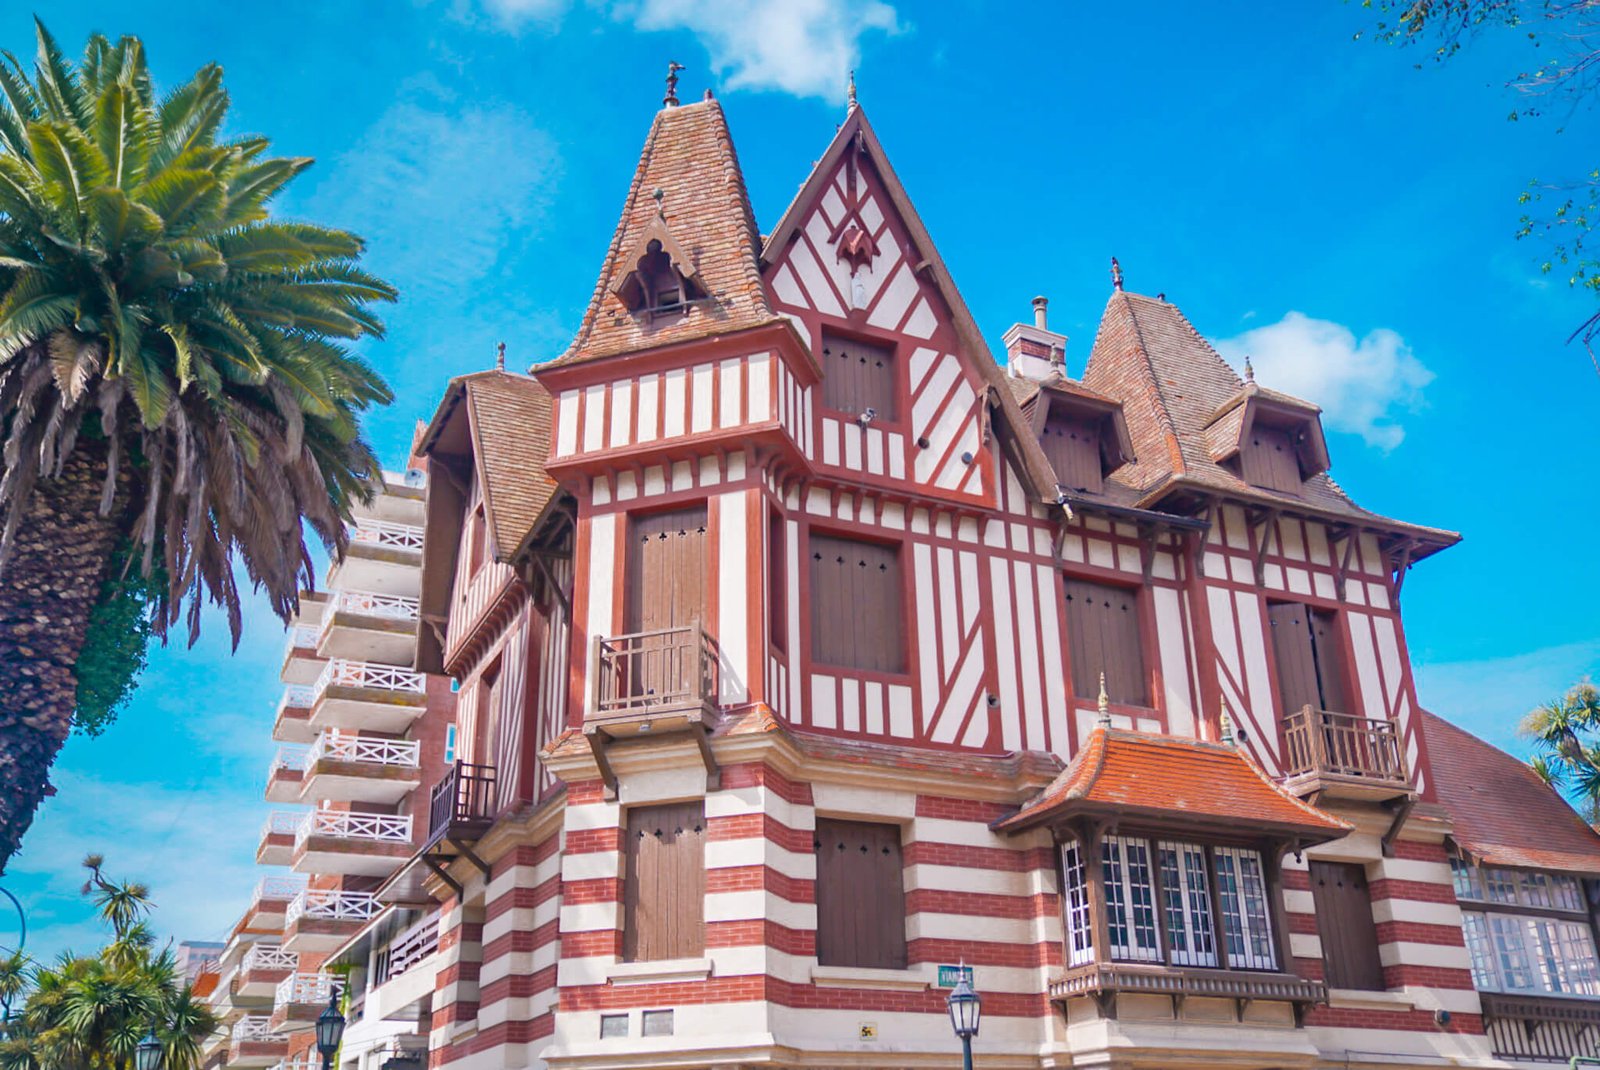 Villa Normandy, things to see in Mar del Plata